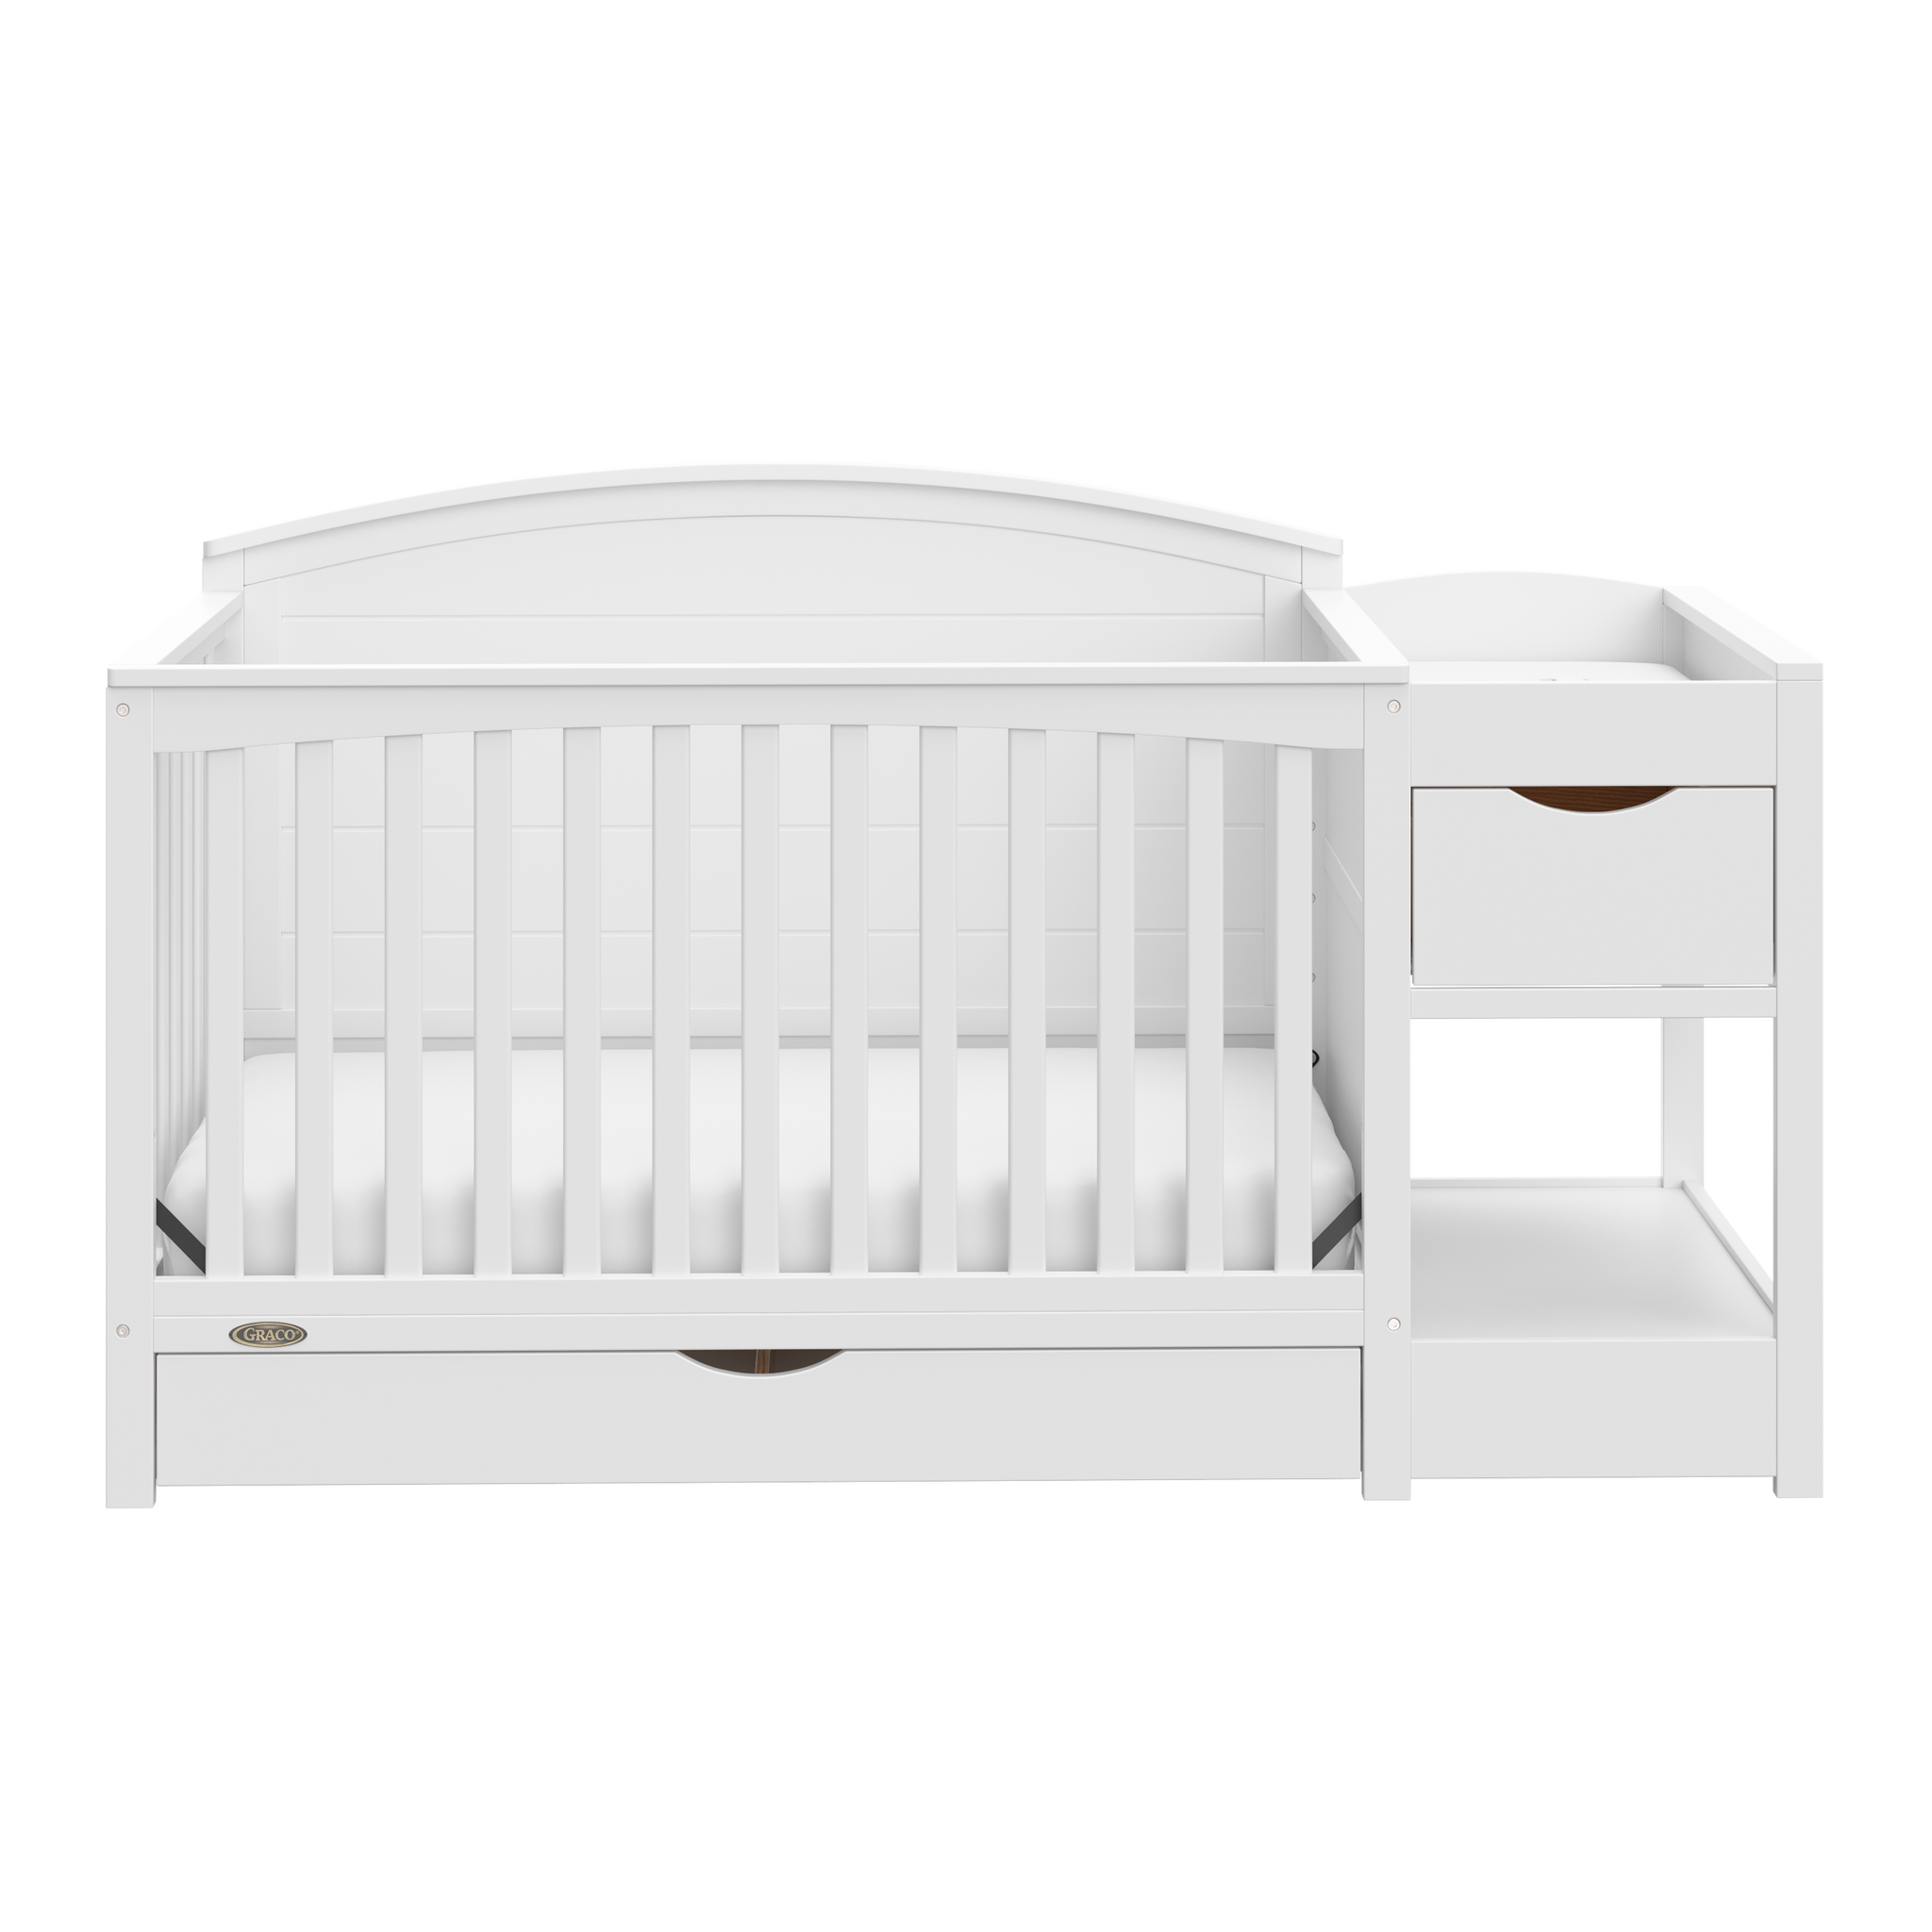 front view of white convertible crib and changer